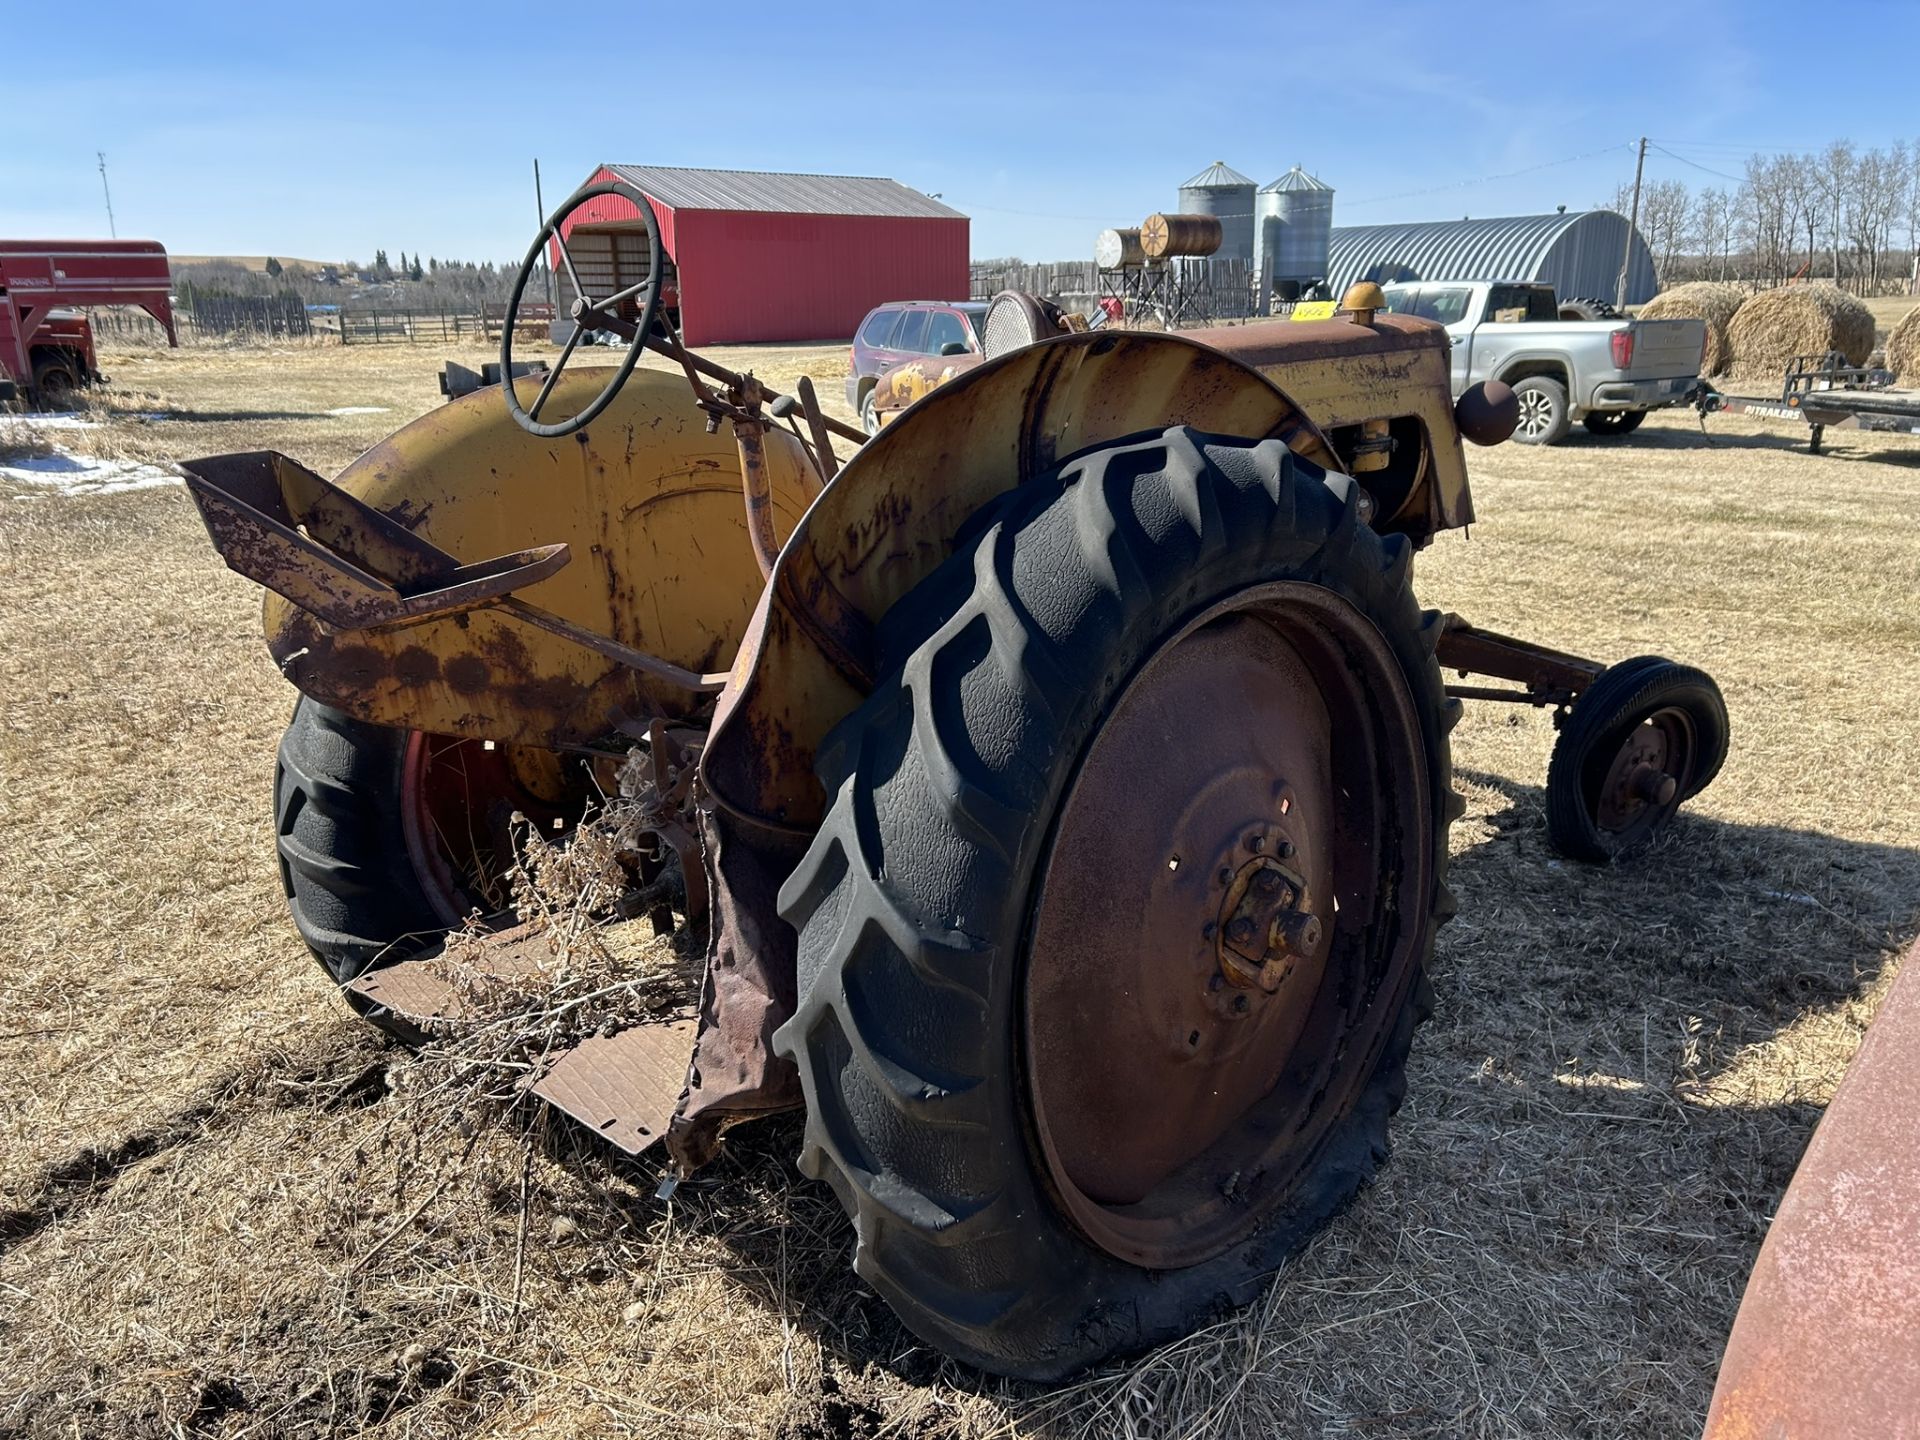 **OFFSITE** 1944 MINNEAPOLIS MOLINE MOD. 7AE TRACTOR S/N 0094900101 - LOCATED 40515 RANGE ROAD - Image 3 of 5